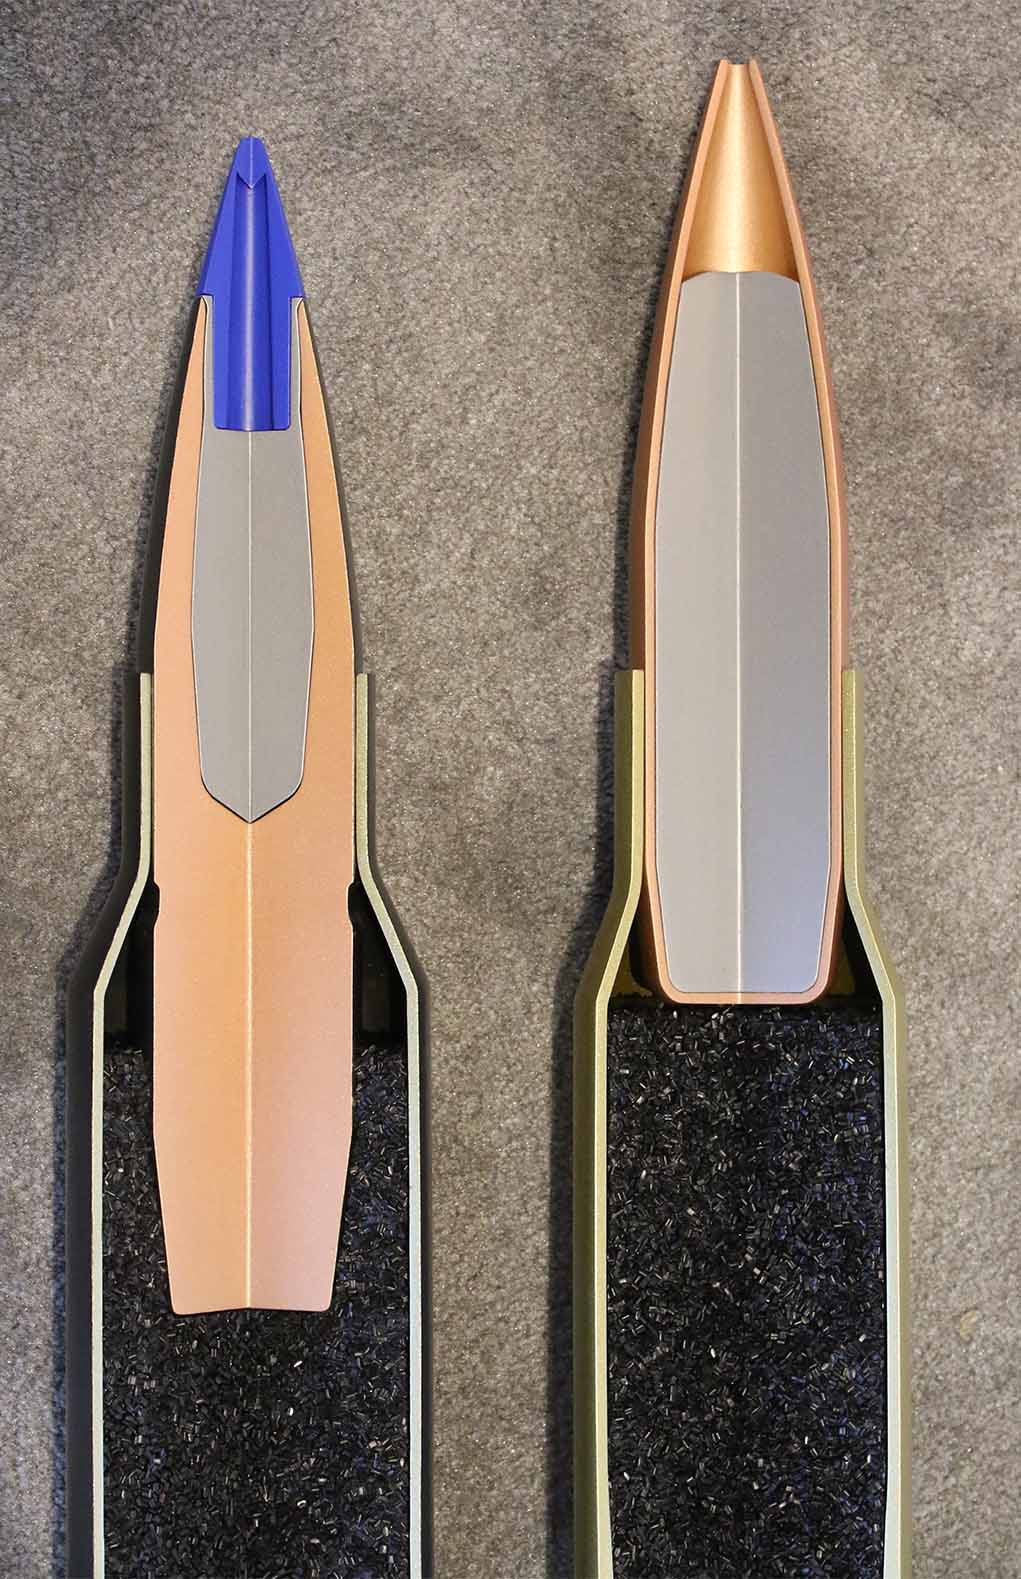 Here you can see the difference bullet weight makes. These two dummy cartridges show the distance a heavy bullet protrudes back into the case. This takes up case capacity, but since we are looking for subsonic performance with heavyweight bullets, reduced case capacity is a good thing.